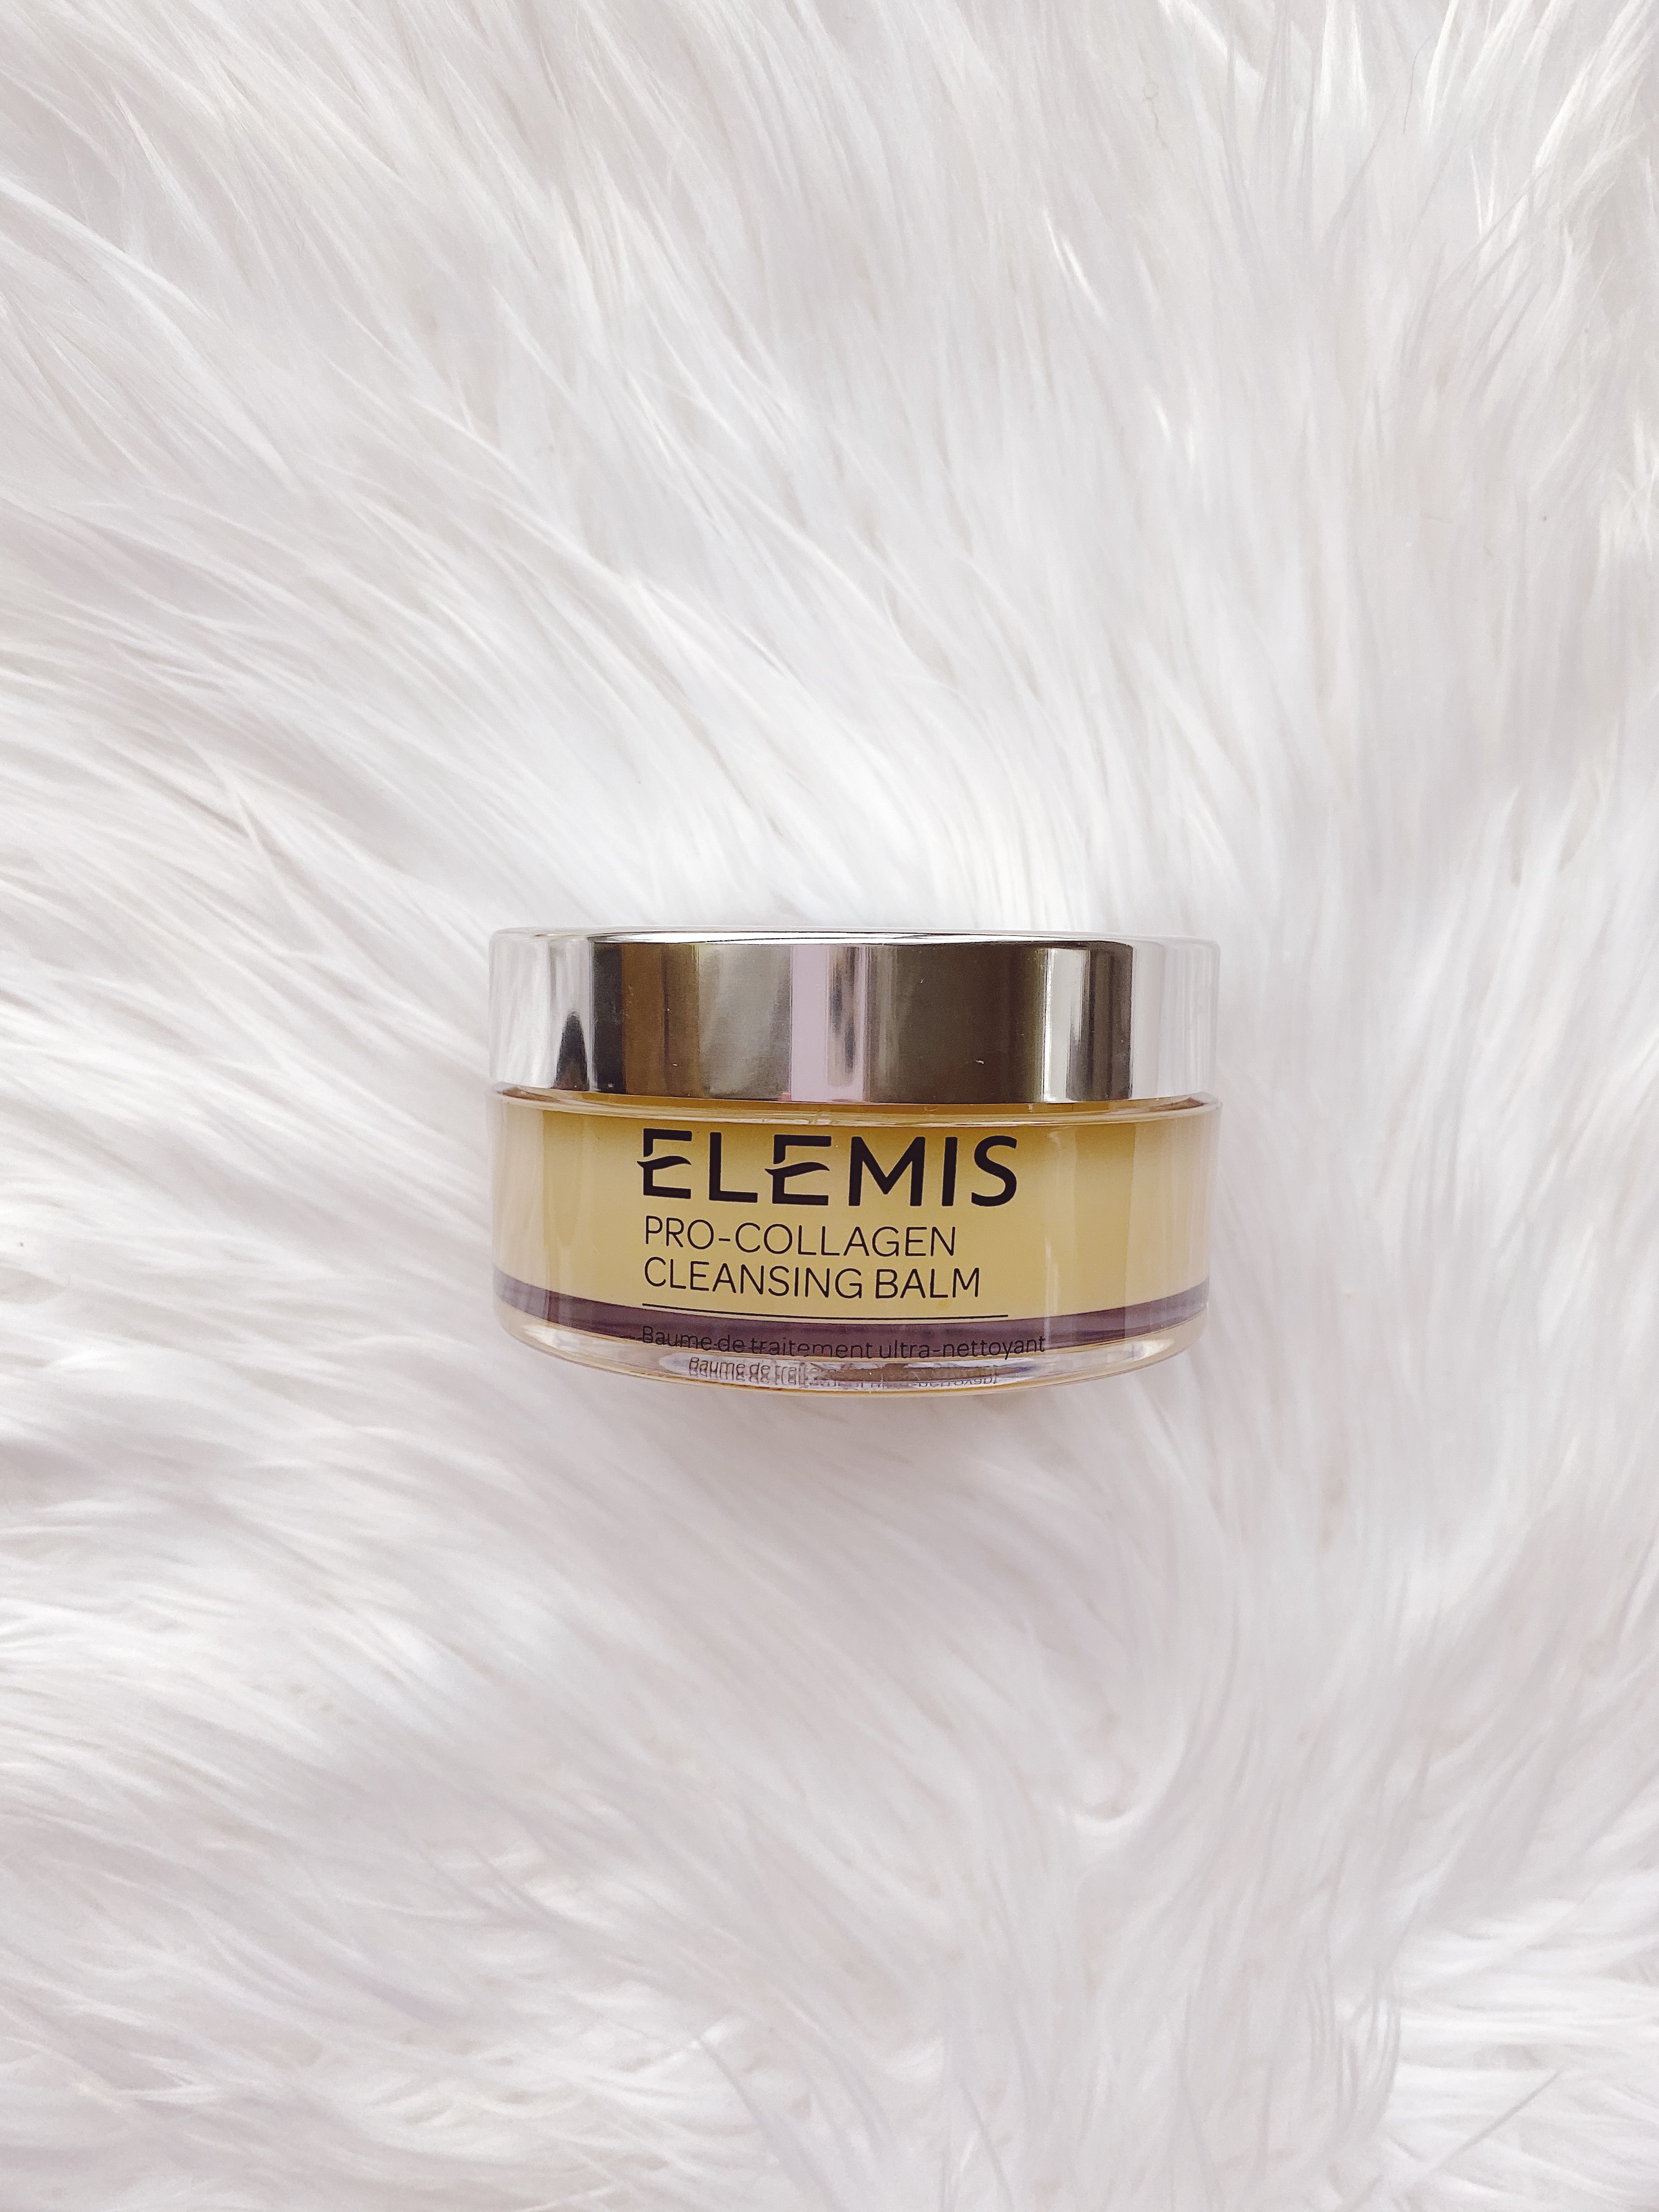 elemis-pro-colagen-cleansing-balm-skincare-nighttime-routine